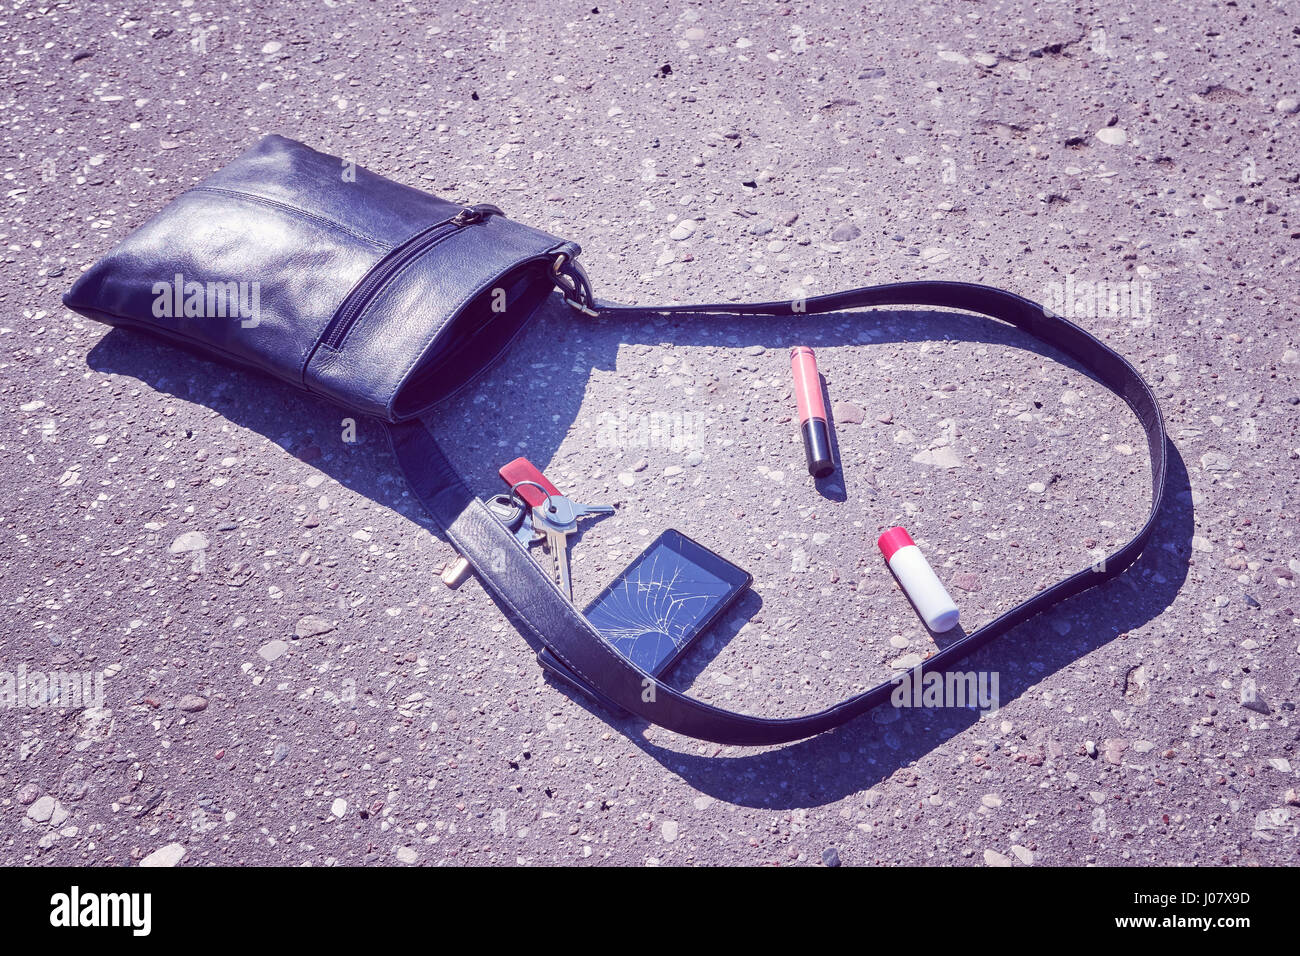 Handbag, cellular phone with broken screen, keys and lipstick on asphalt street, conceptual picture, color toning applied. Stock Photo